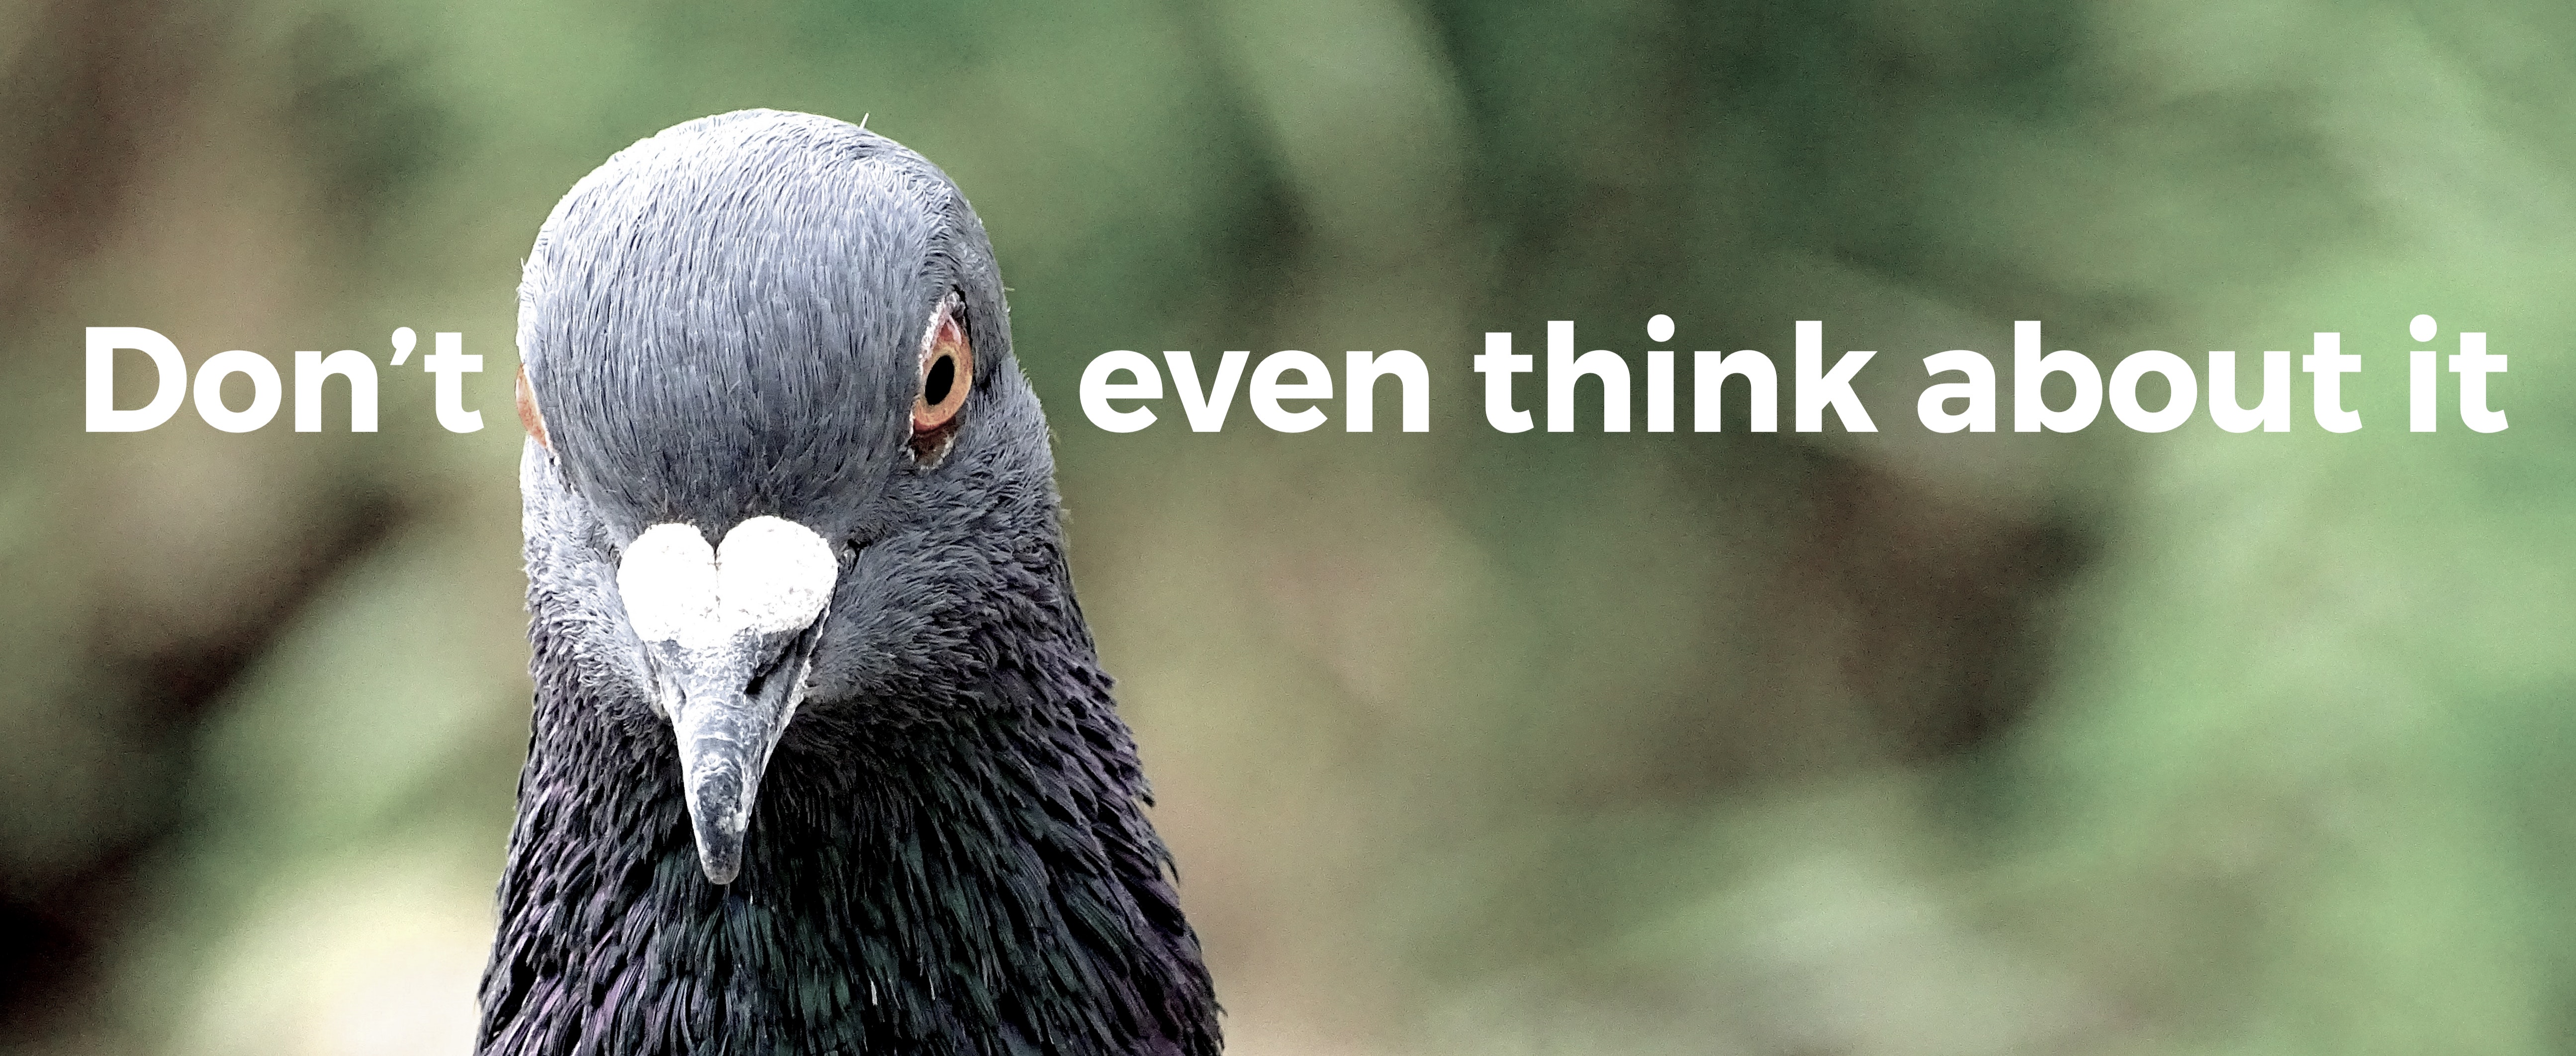 pigeon saying don't even think about it.